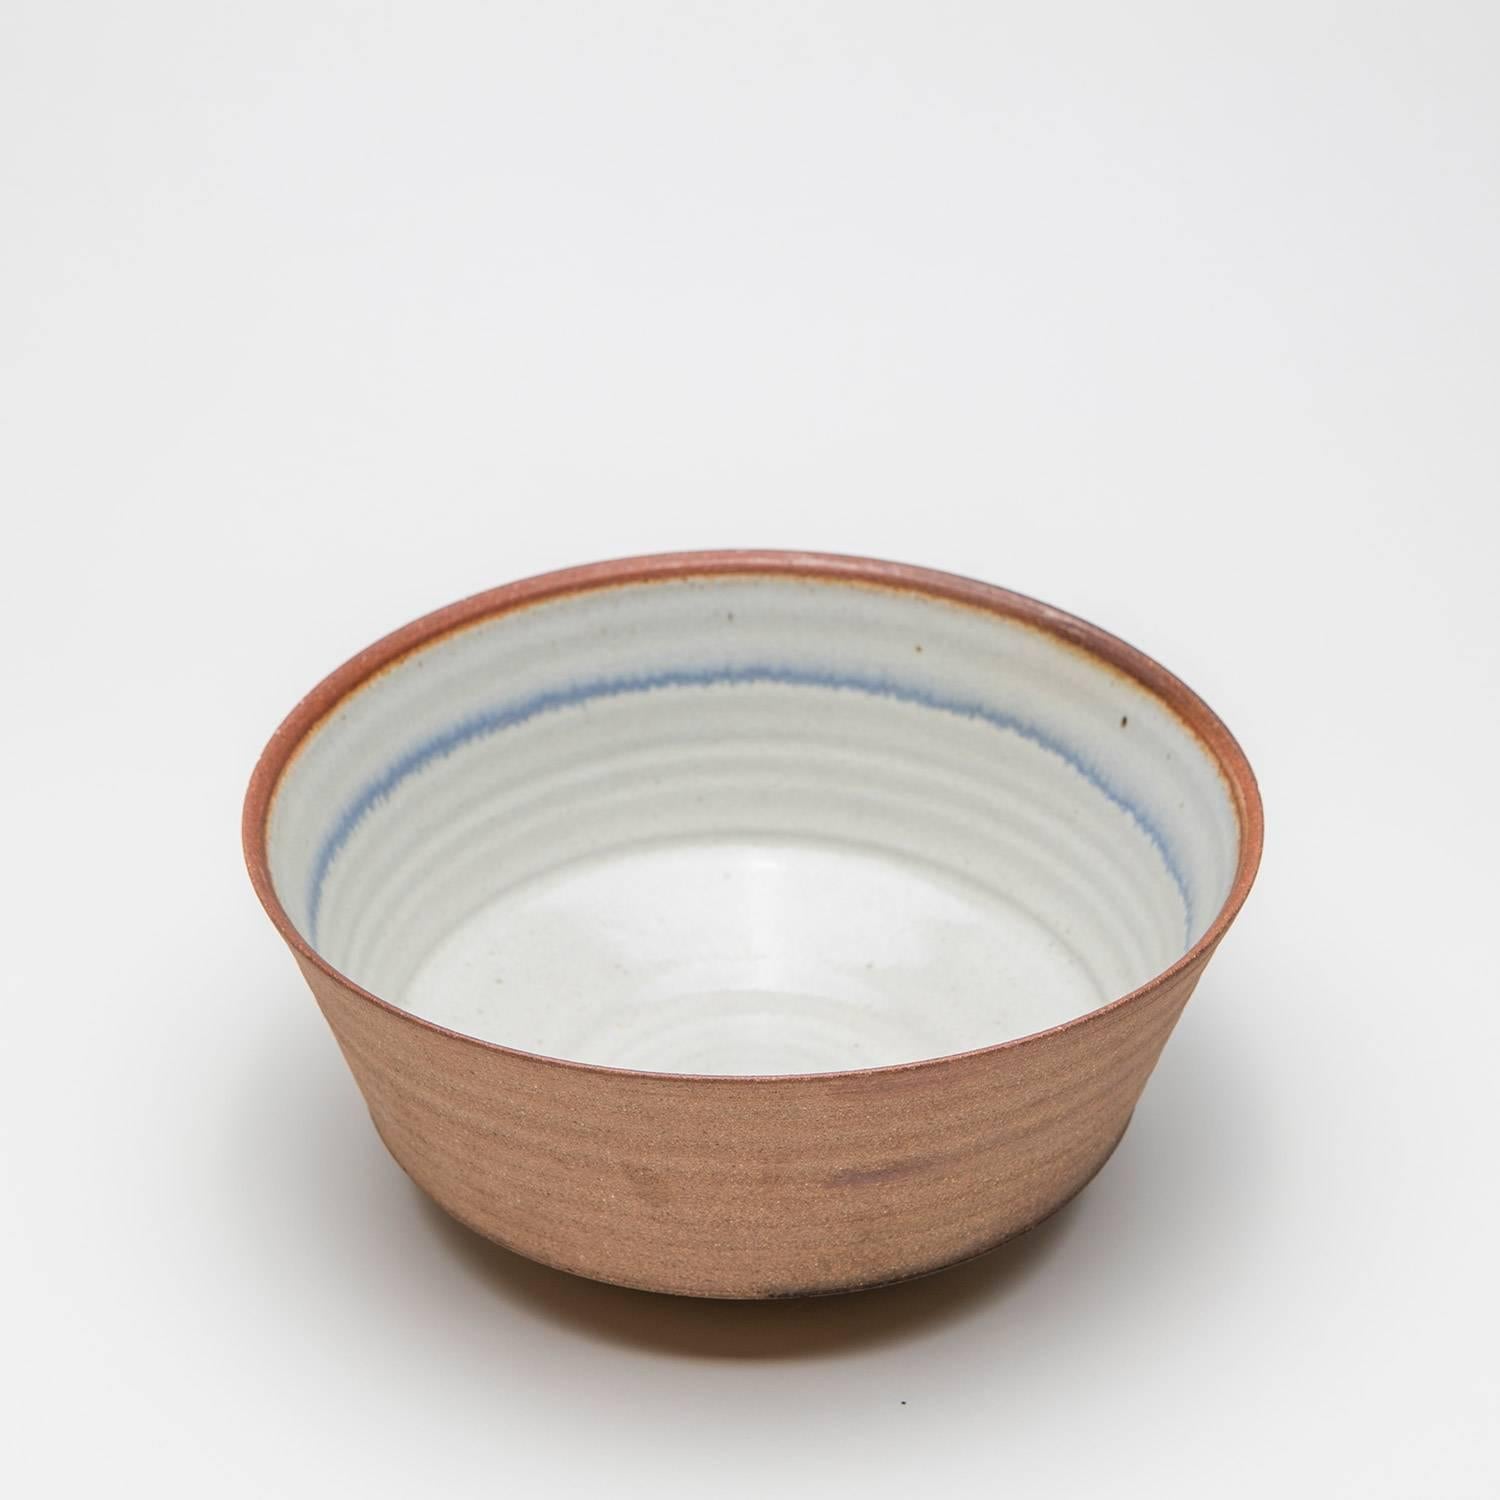 Remarkable stoneware centerpiece by Nanni Valentini for Ceramica Arcore.
Shape and decoration has strong connections to the work of Lucie Rie.
Part of a collection with several other sculptures and centerpieces by the artist.